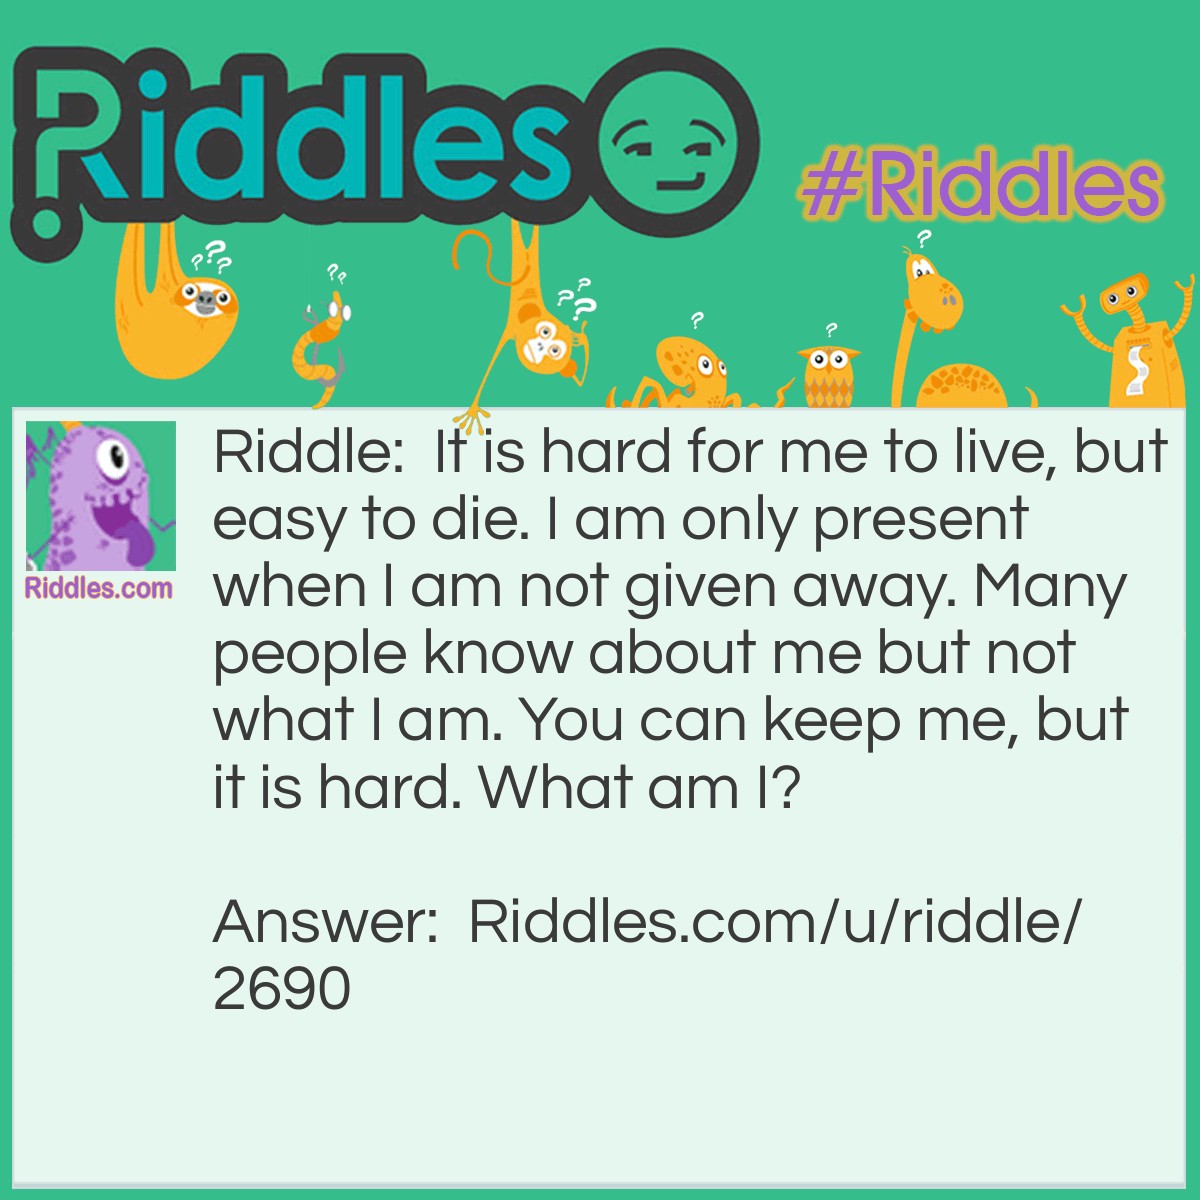 Riddle: It is hard for me to live, but <a href="/easy-riddles">easy</a> to die. I am only present when I am not given away. Many people know about me but not what I am. You can keep me, but it is hard. What am I? Answer: A secret.